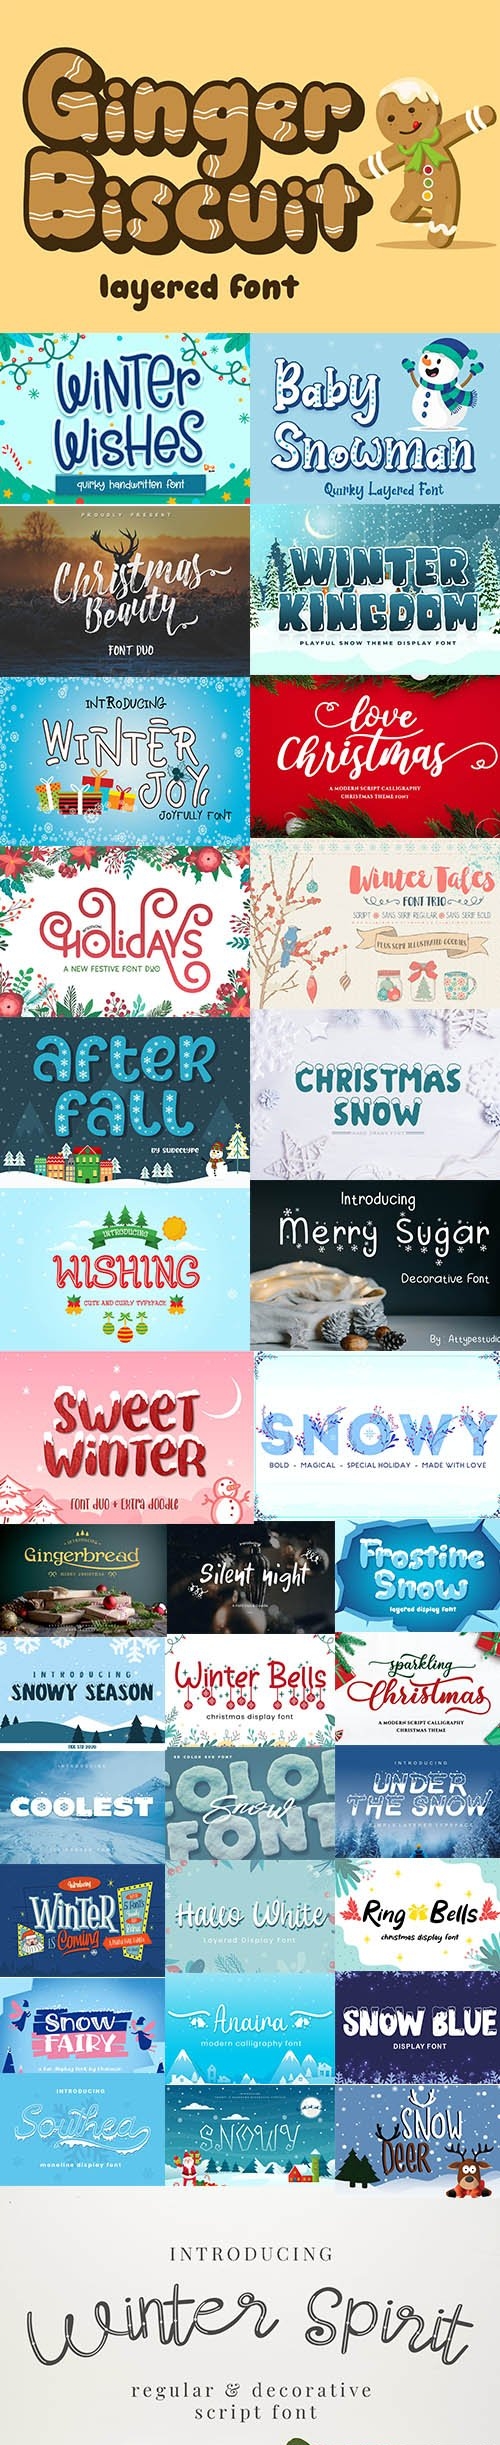 Super Pack 2020 with Christmas Winter Fonts !!!